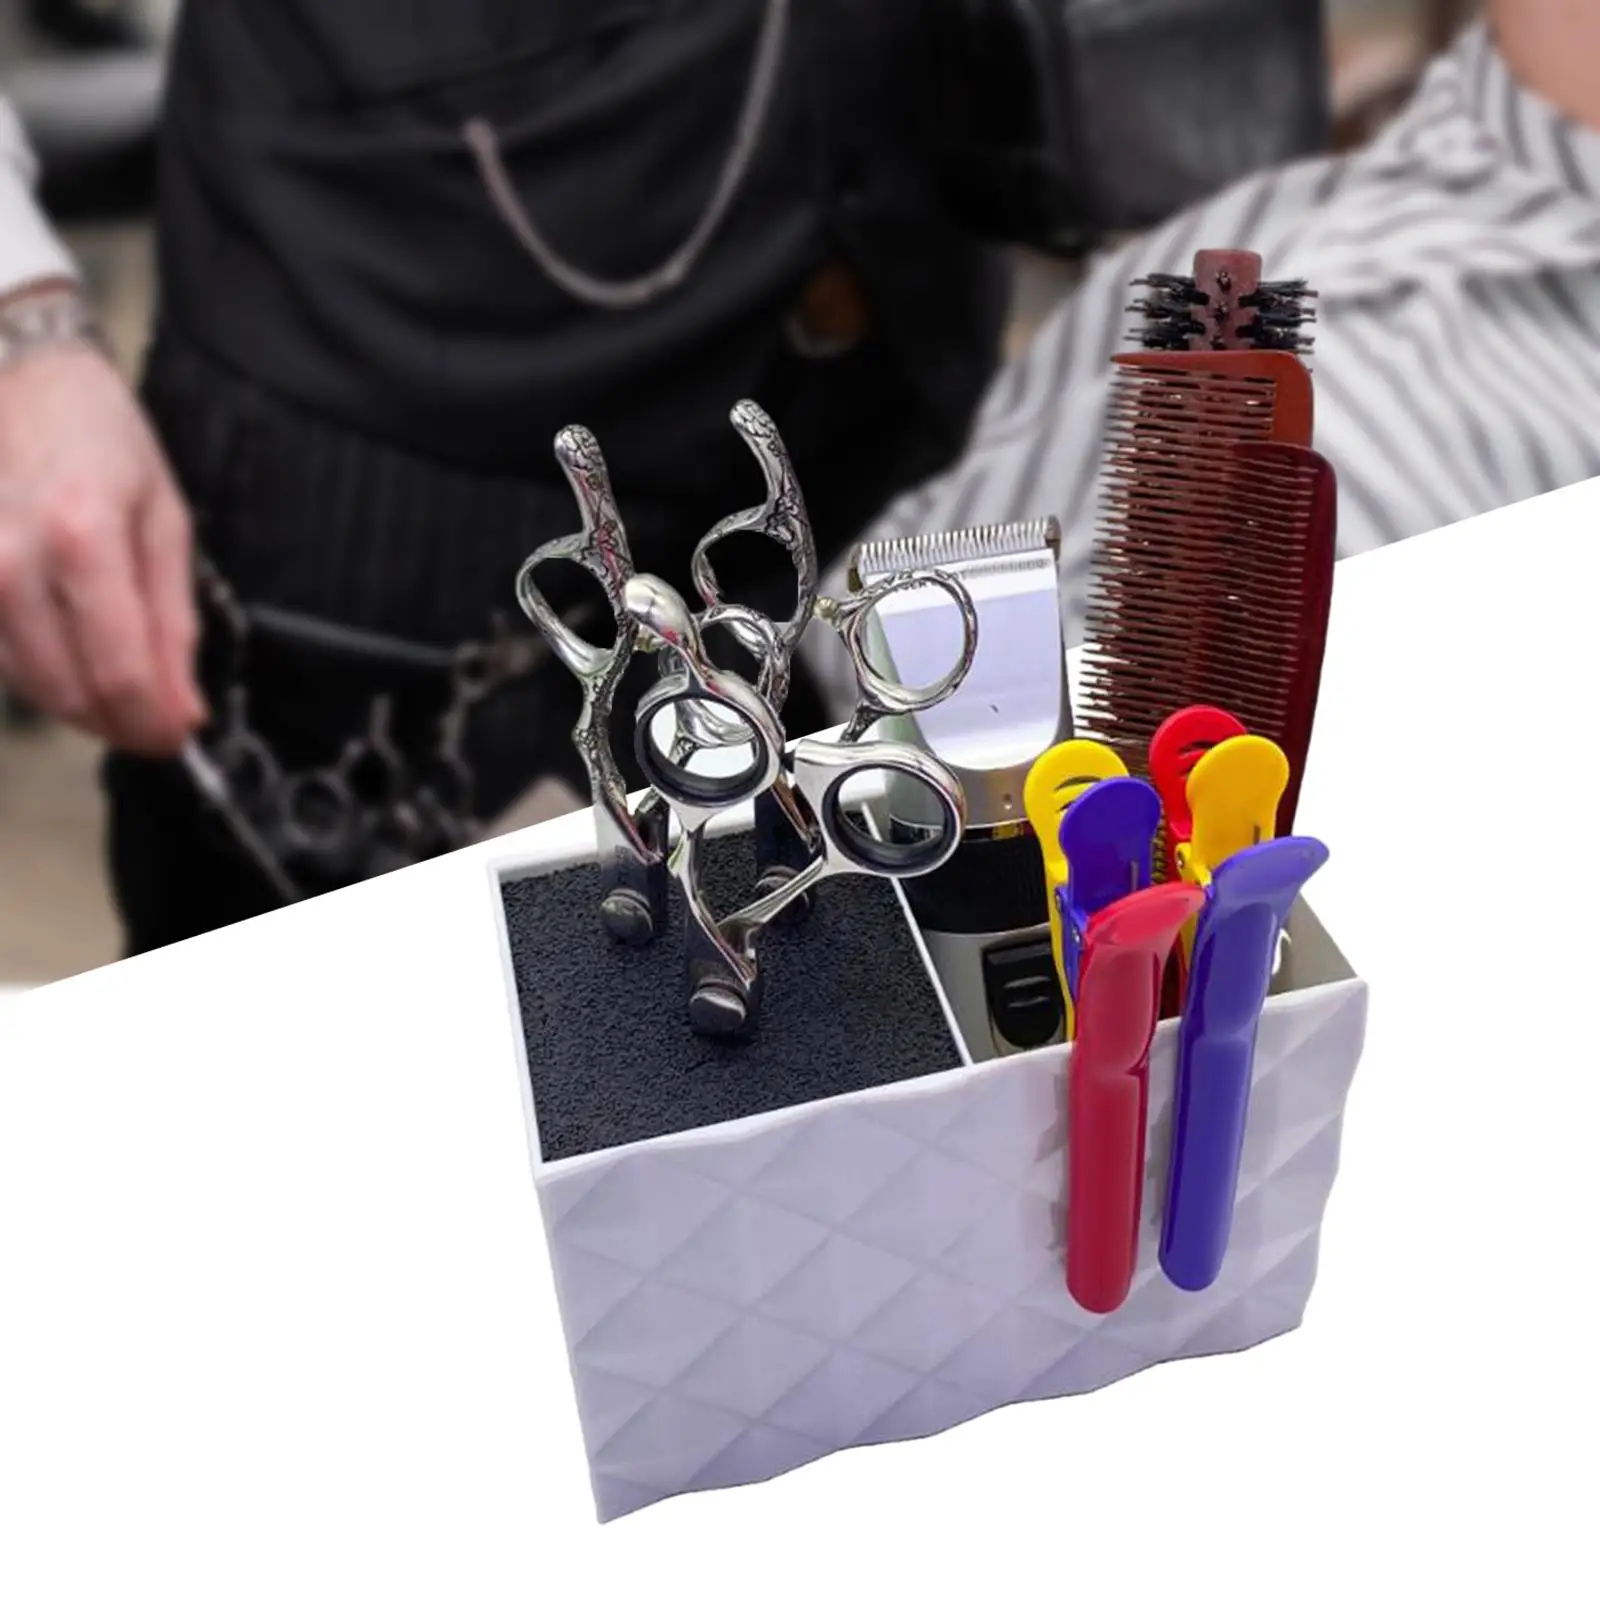 Scissor Combs Clips Holder Hairdressing Scissors Holder Shears Block for Home Salon Use Hairstyling Hair Brushes Combs